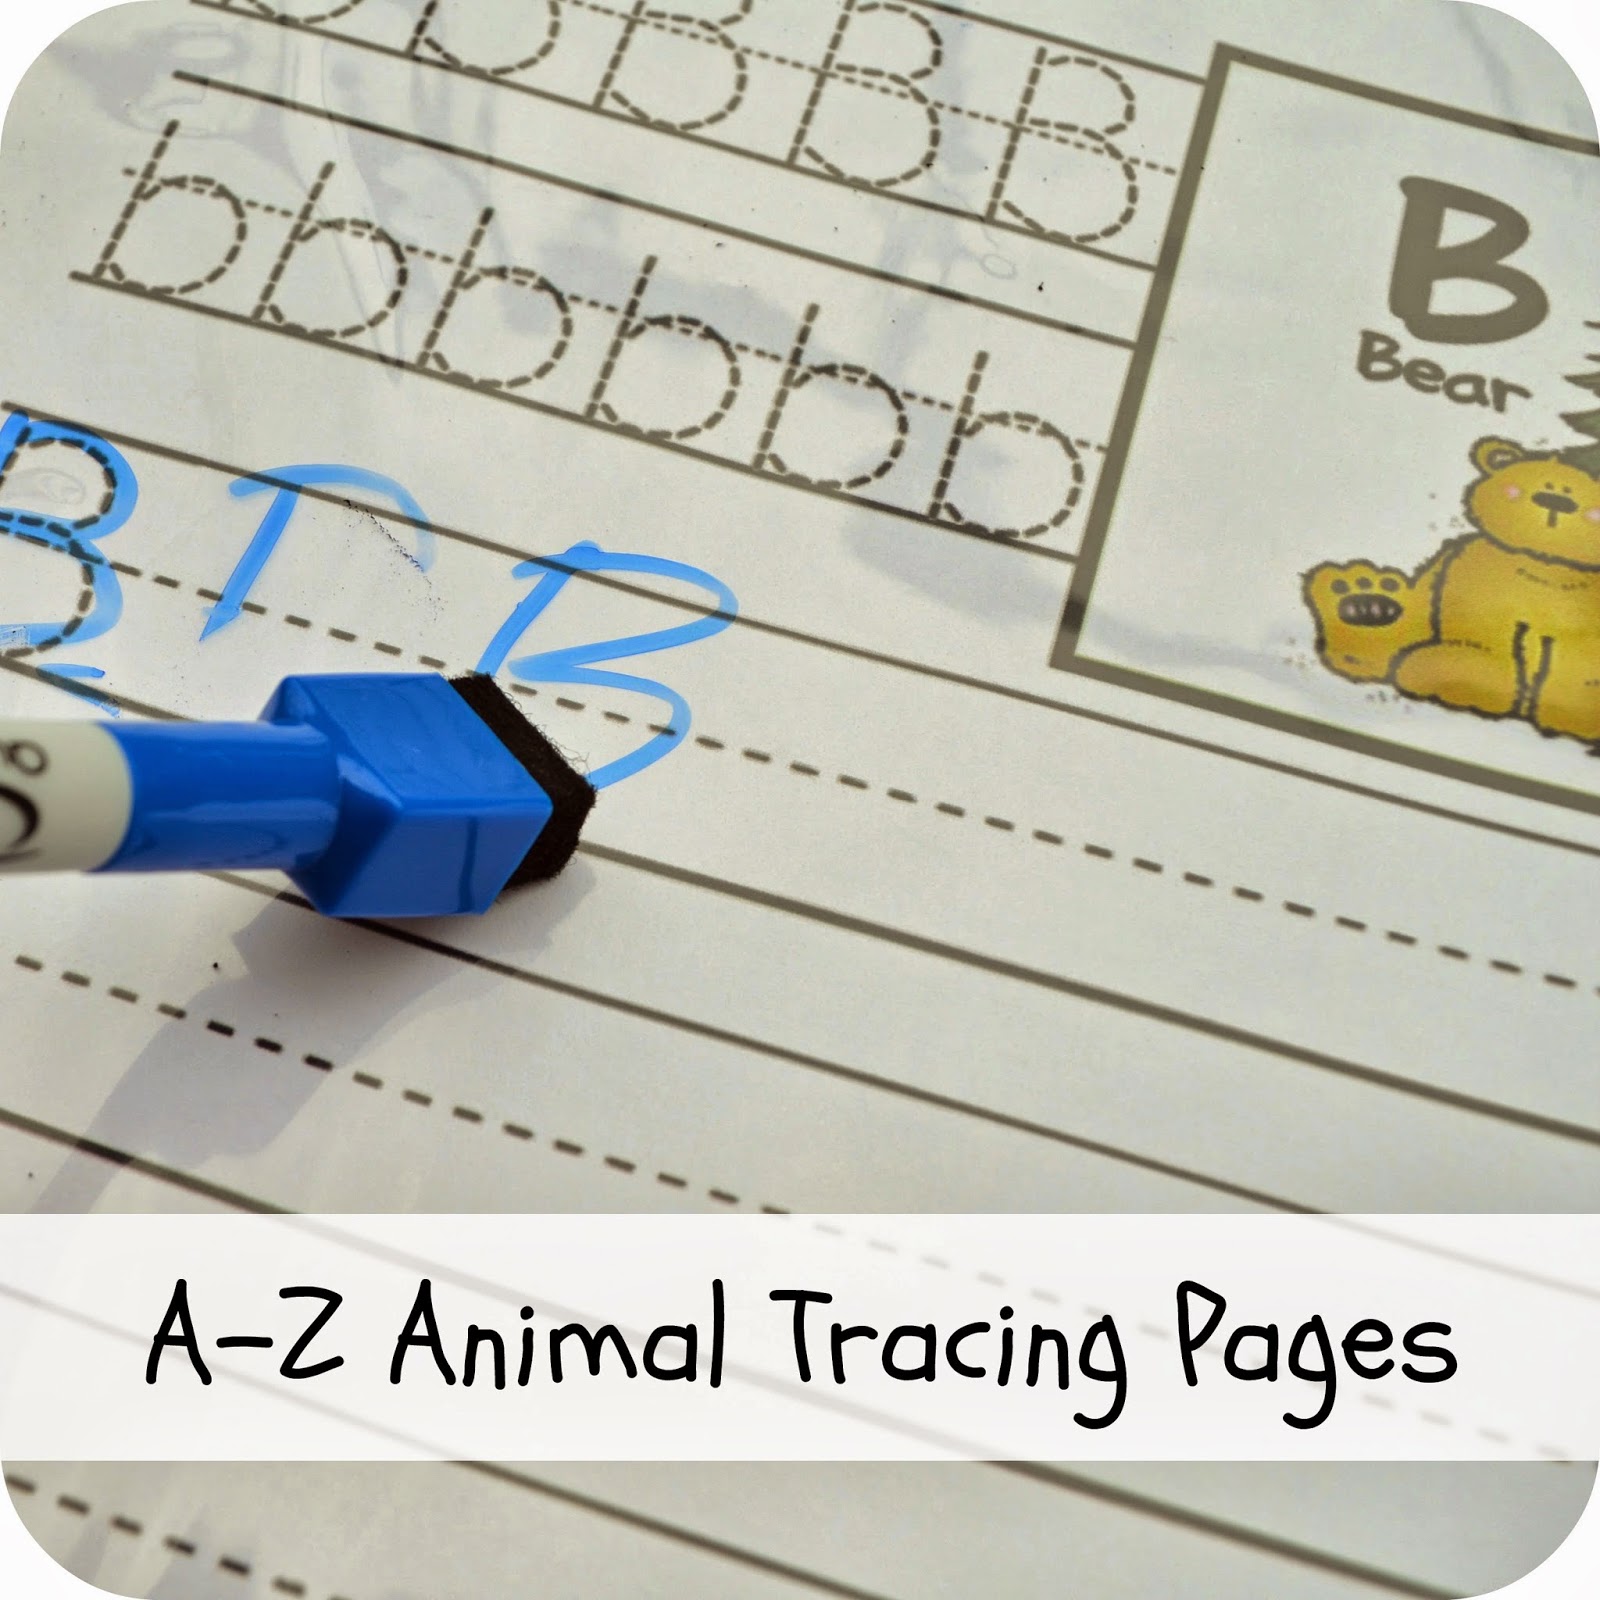 A-Z Animal Tracing Pages